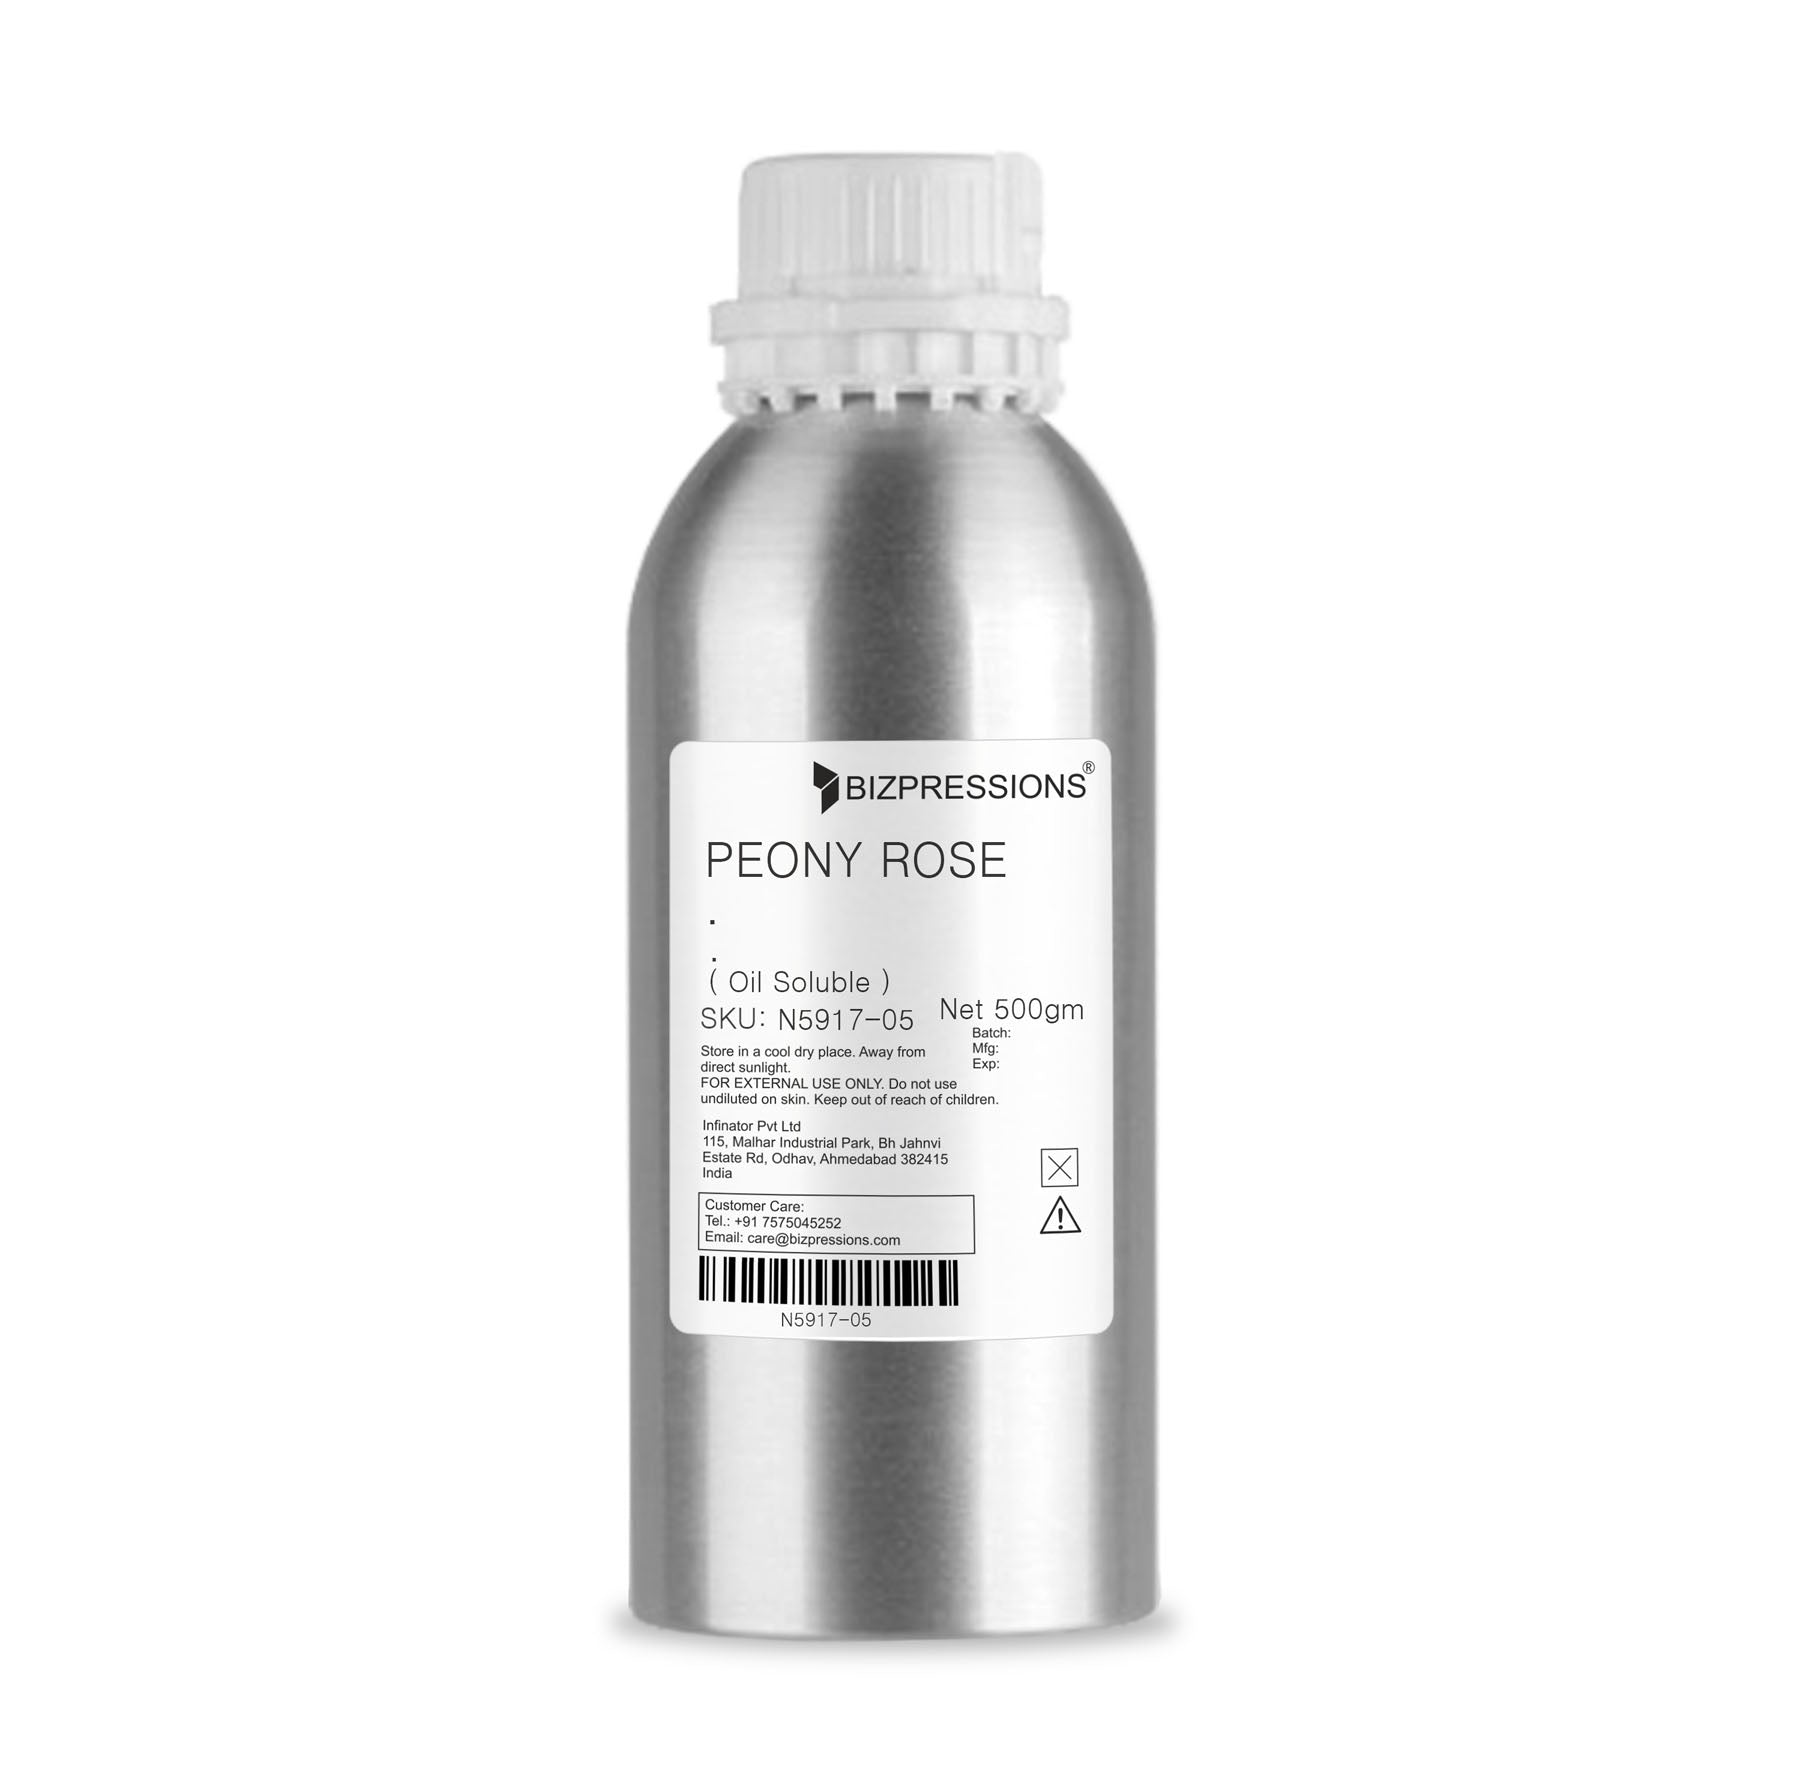 PEONY ROSE - Fragrance ( Oil Soluble ) - 500 gm